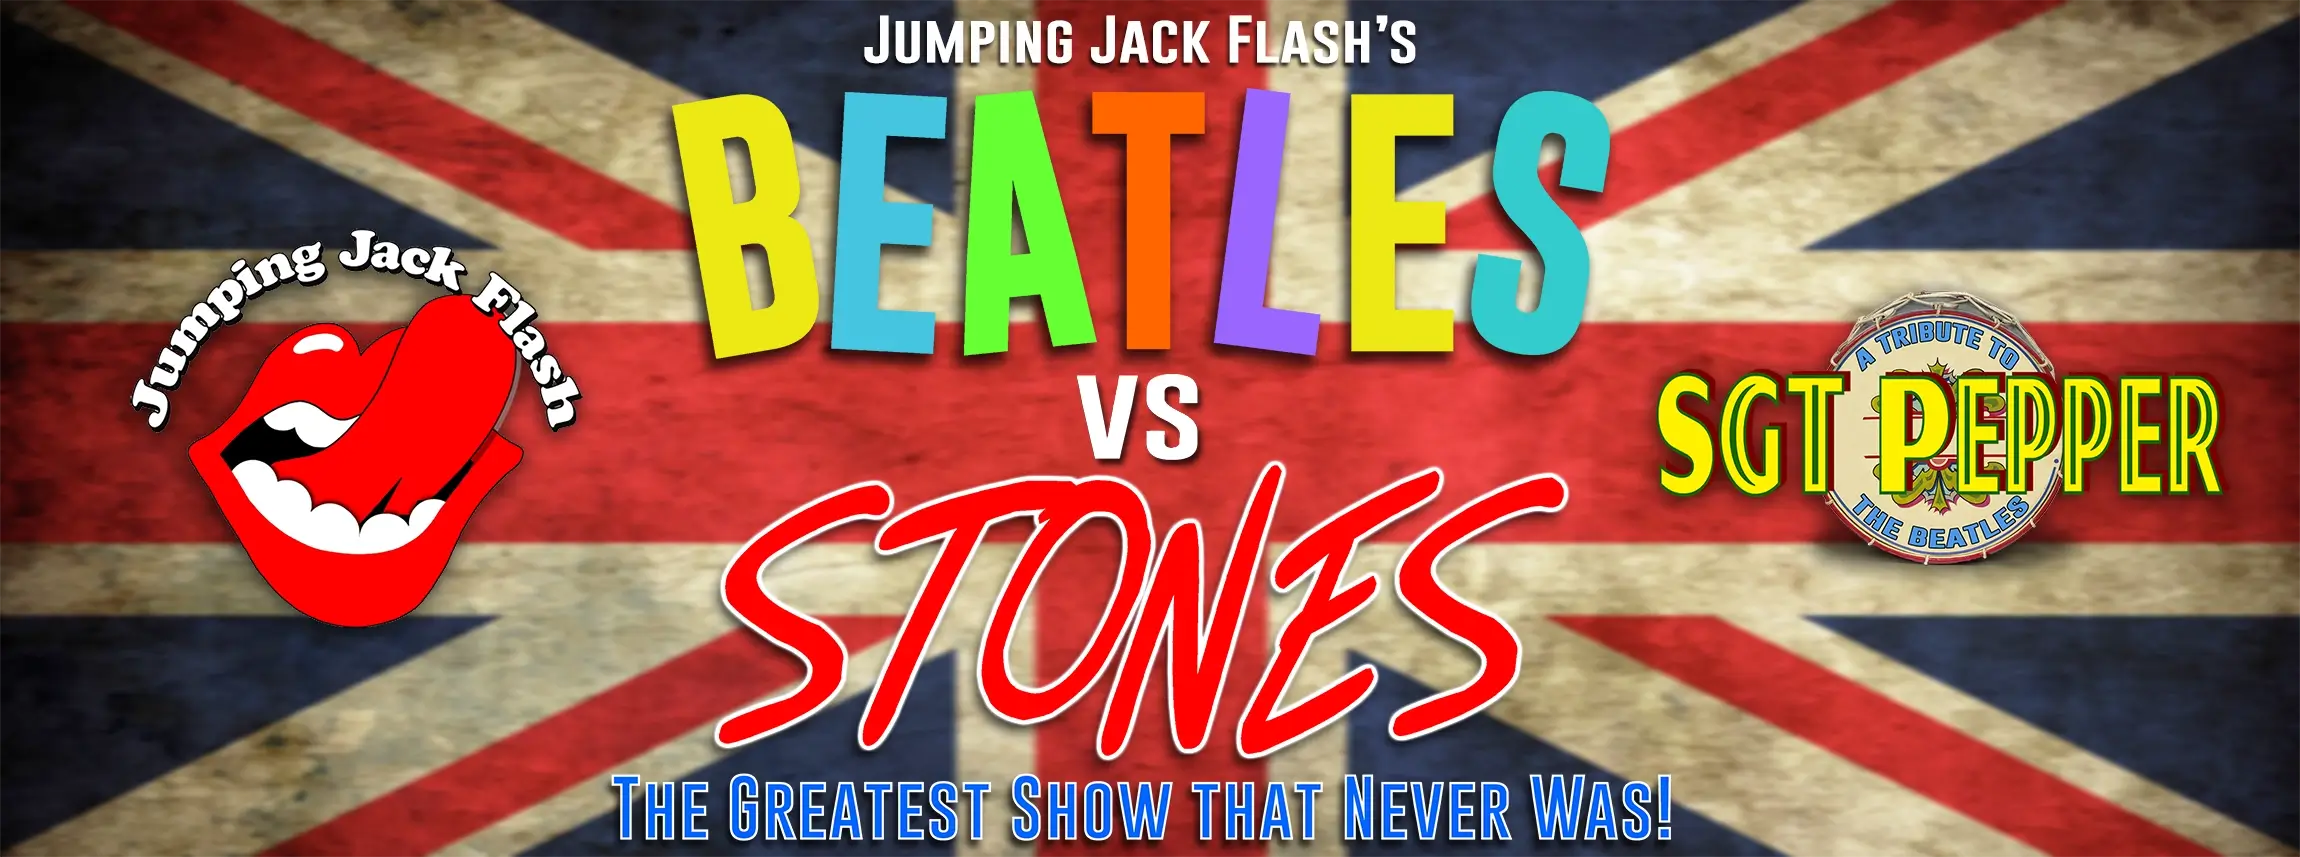 Beatles vs Stones: the Greatest Show that Never Was!